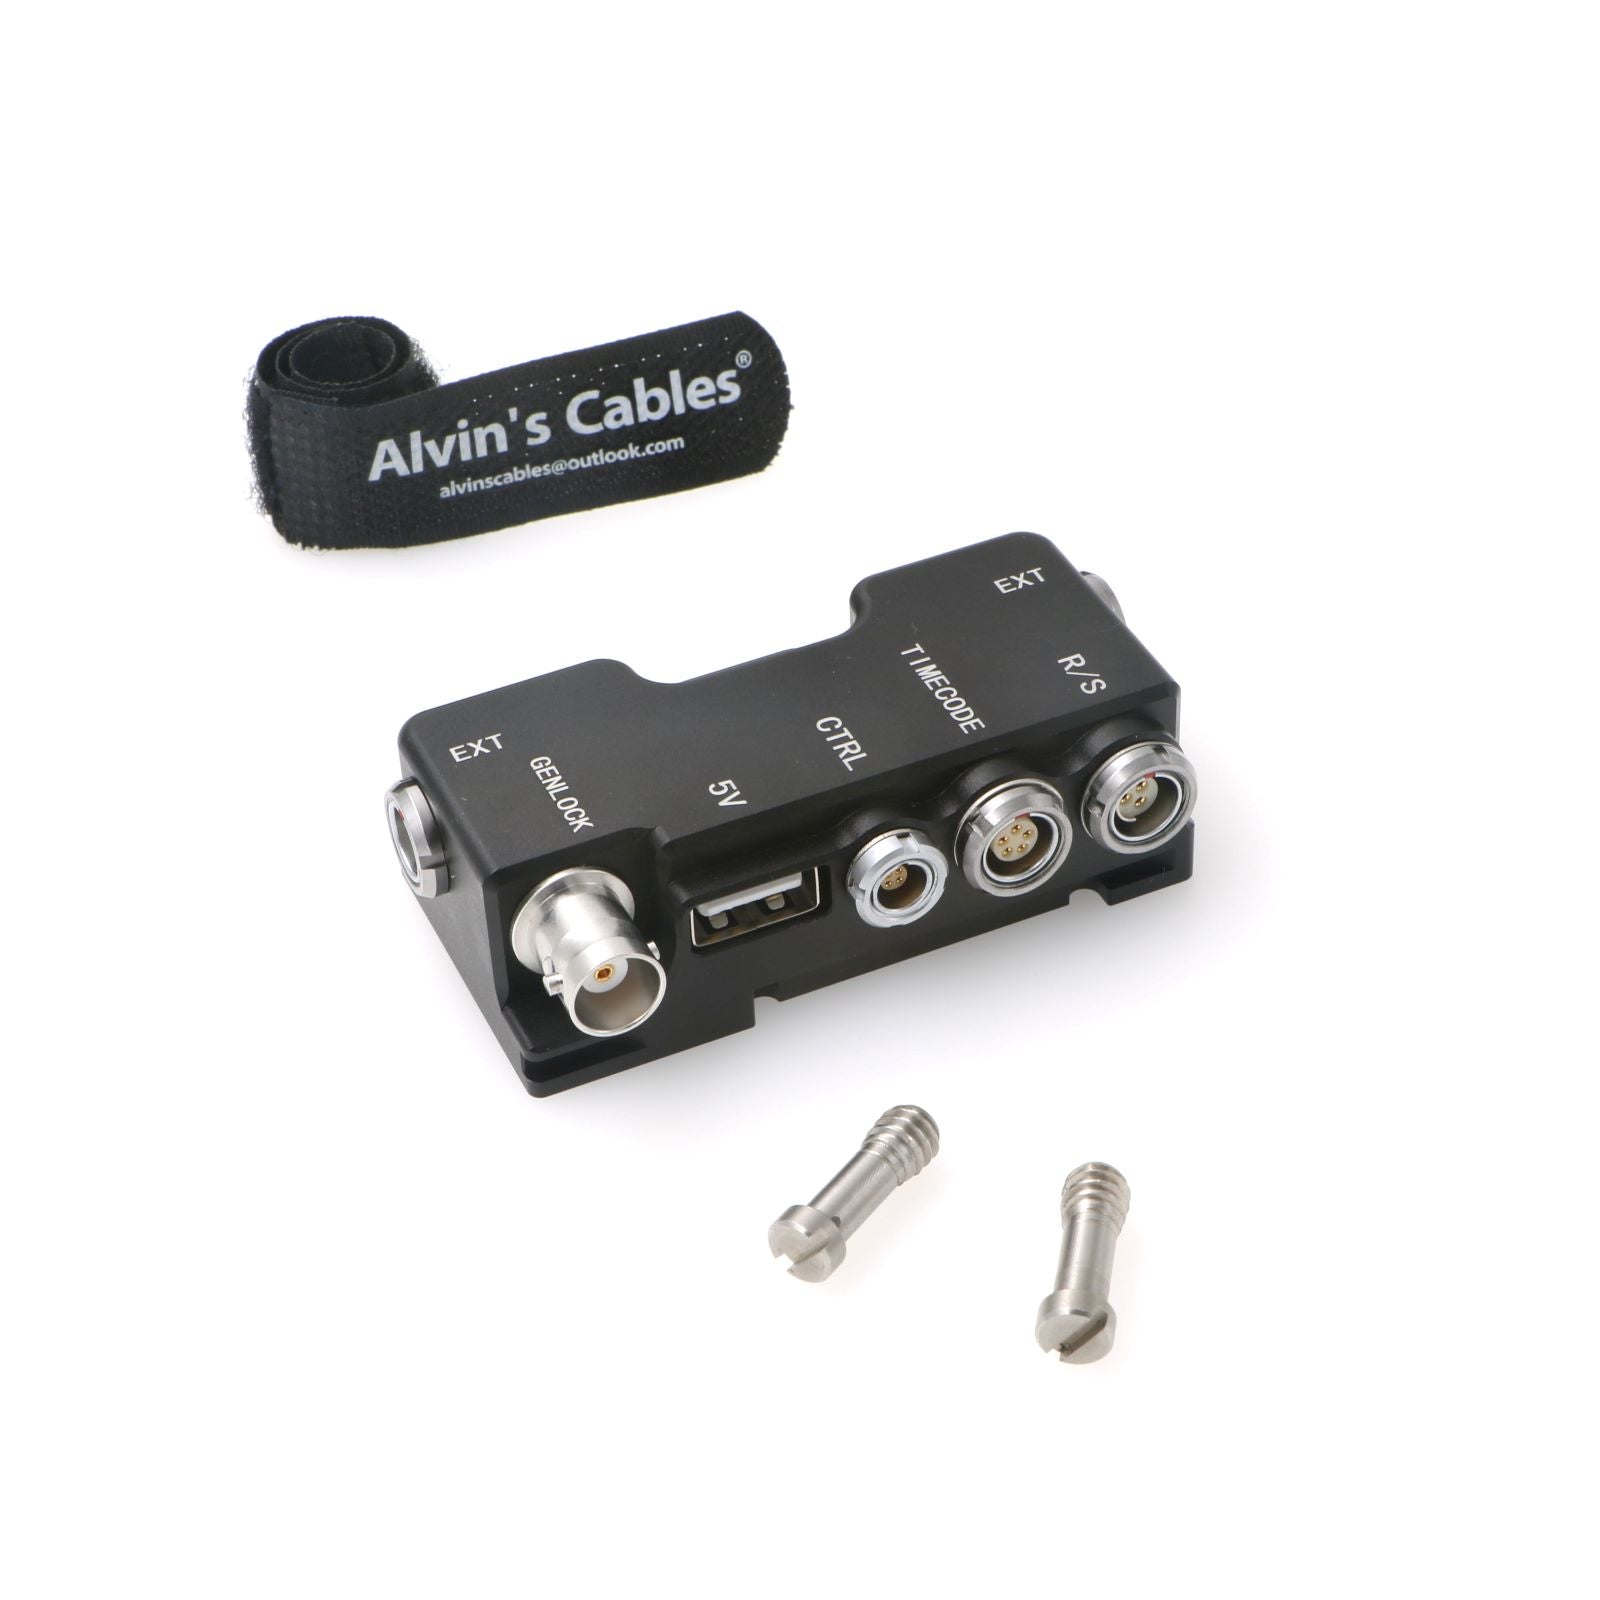 Alvin’s Cables Breakout B-Box for RED-KOMODO Camera EXT-9-Pin to Run-Stop|Timecode|CTRL|5V USB| Genlock-BNC Splitter-Box with Straight to Right Angle Cable